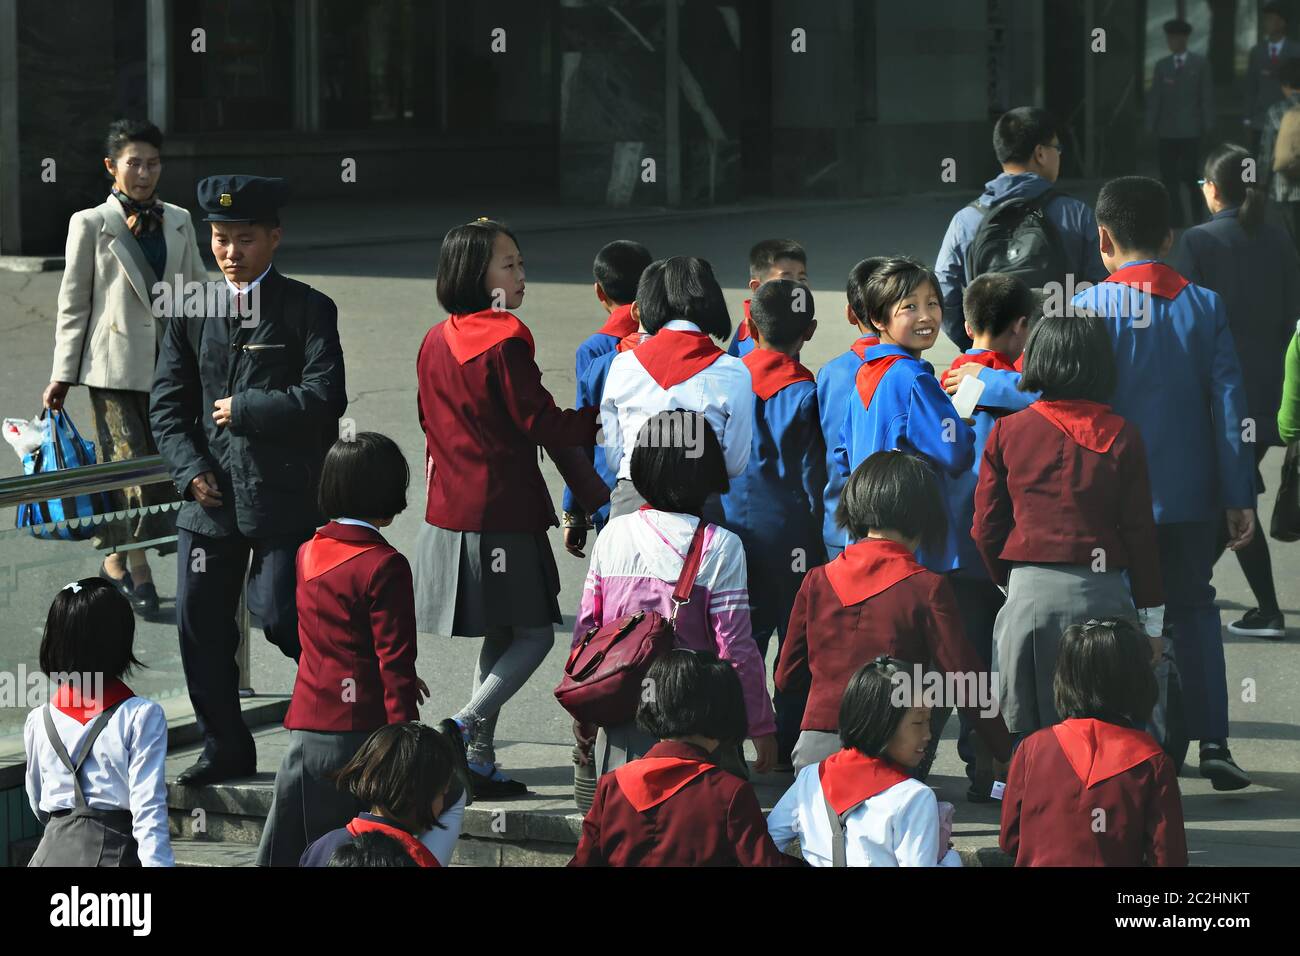 Pyongyang, North Korea - April 29, 2019: Young children, members of the Korean Children's Union KCU, Young Pioneer Corps, on a city street Stock Photo